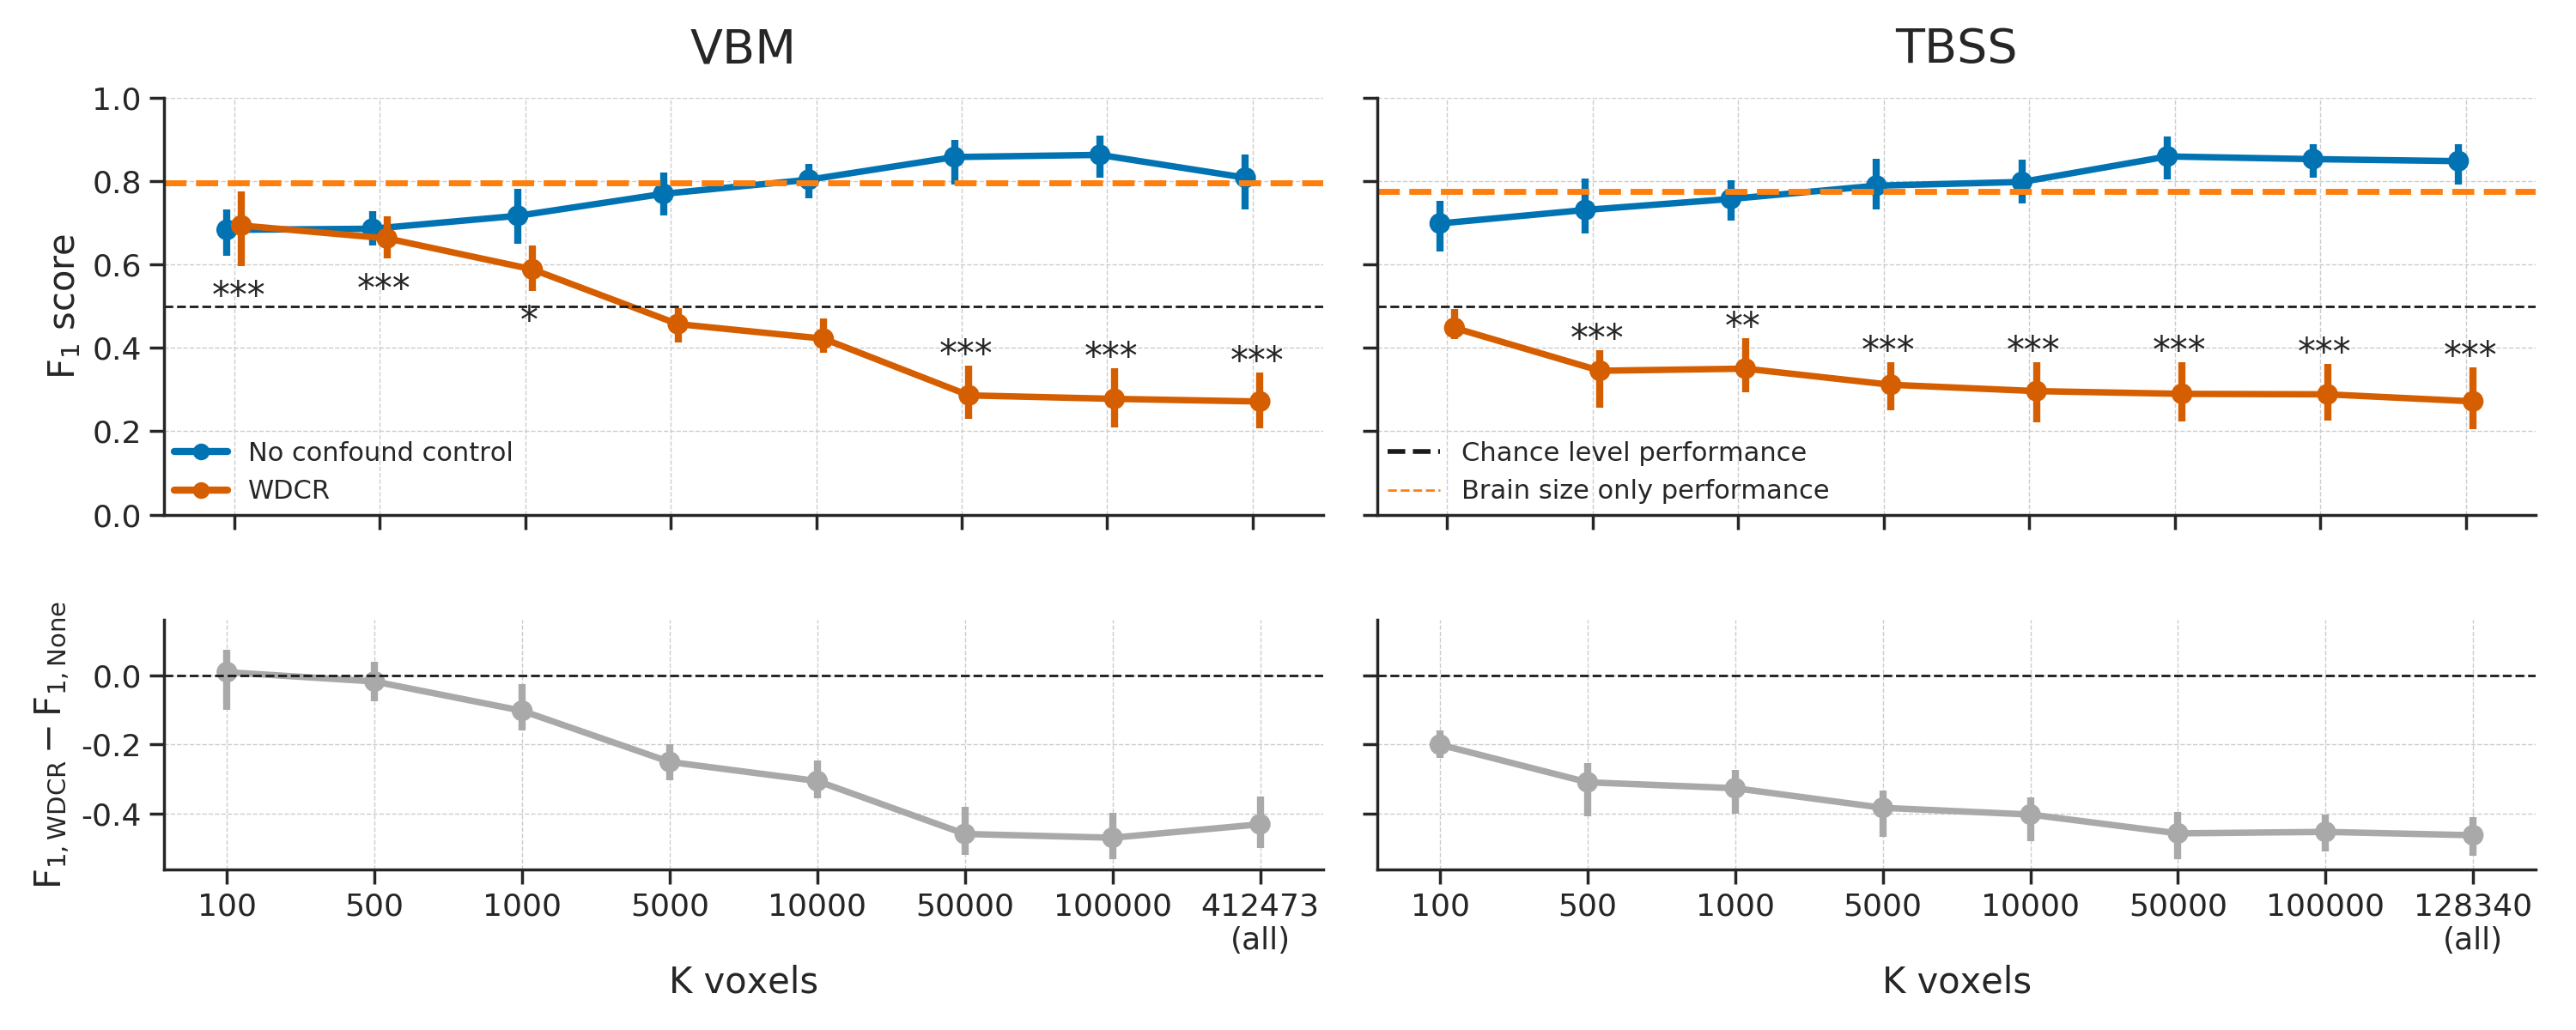 Model performance after WDCR (orange) versus the baseline performance (blue) for both the VBM (left) and TBSS (right) data. Performance reflects the average \(F_{1}\) score across 10 folds; error bars reflect 95% confidence intervals. The dashed black line reflect theoretical chance-level performance (0.5) and the dashed orange line reflects the average model performance when only brain size is used as a predictor. Asterisks indicates performance of the WDCR model that is significantly above or below chance: *** = \(p < 0.001\), ** = \(p < 0.01\), * = \(p < 0.05\).